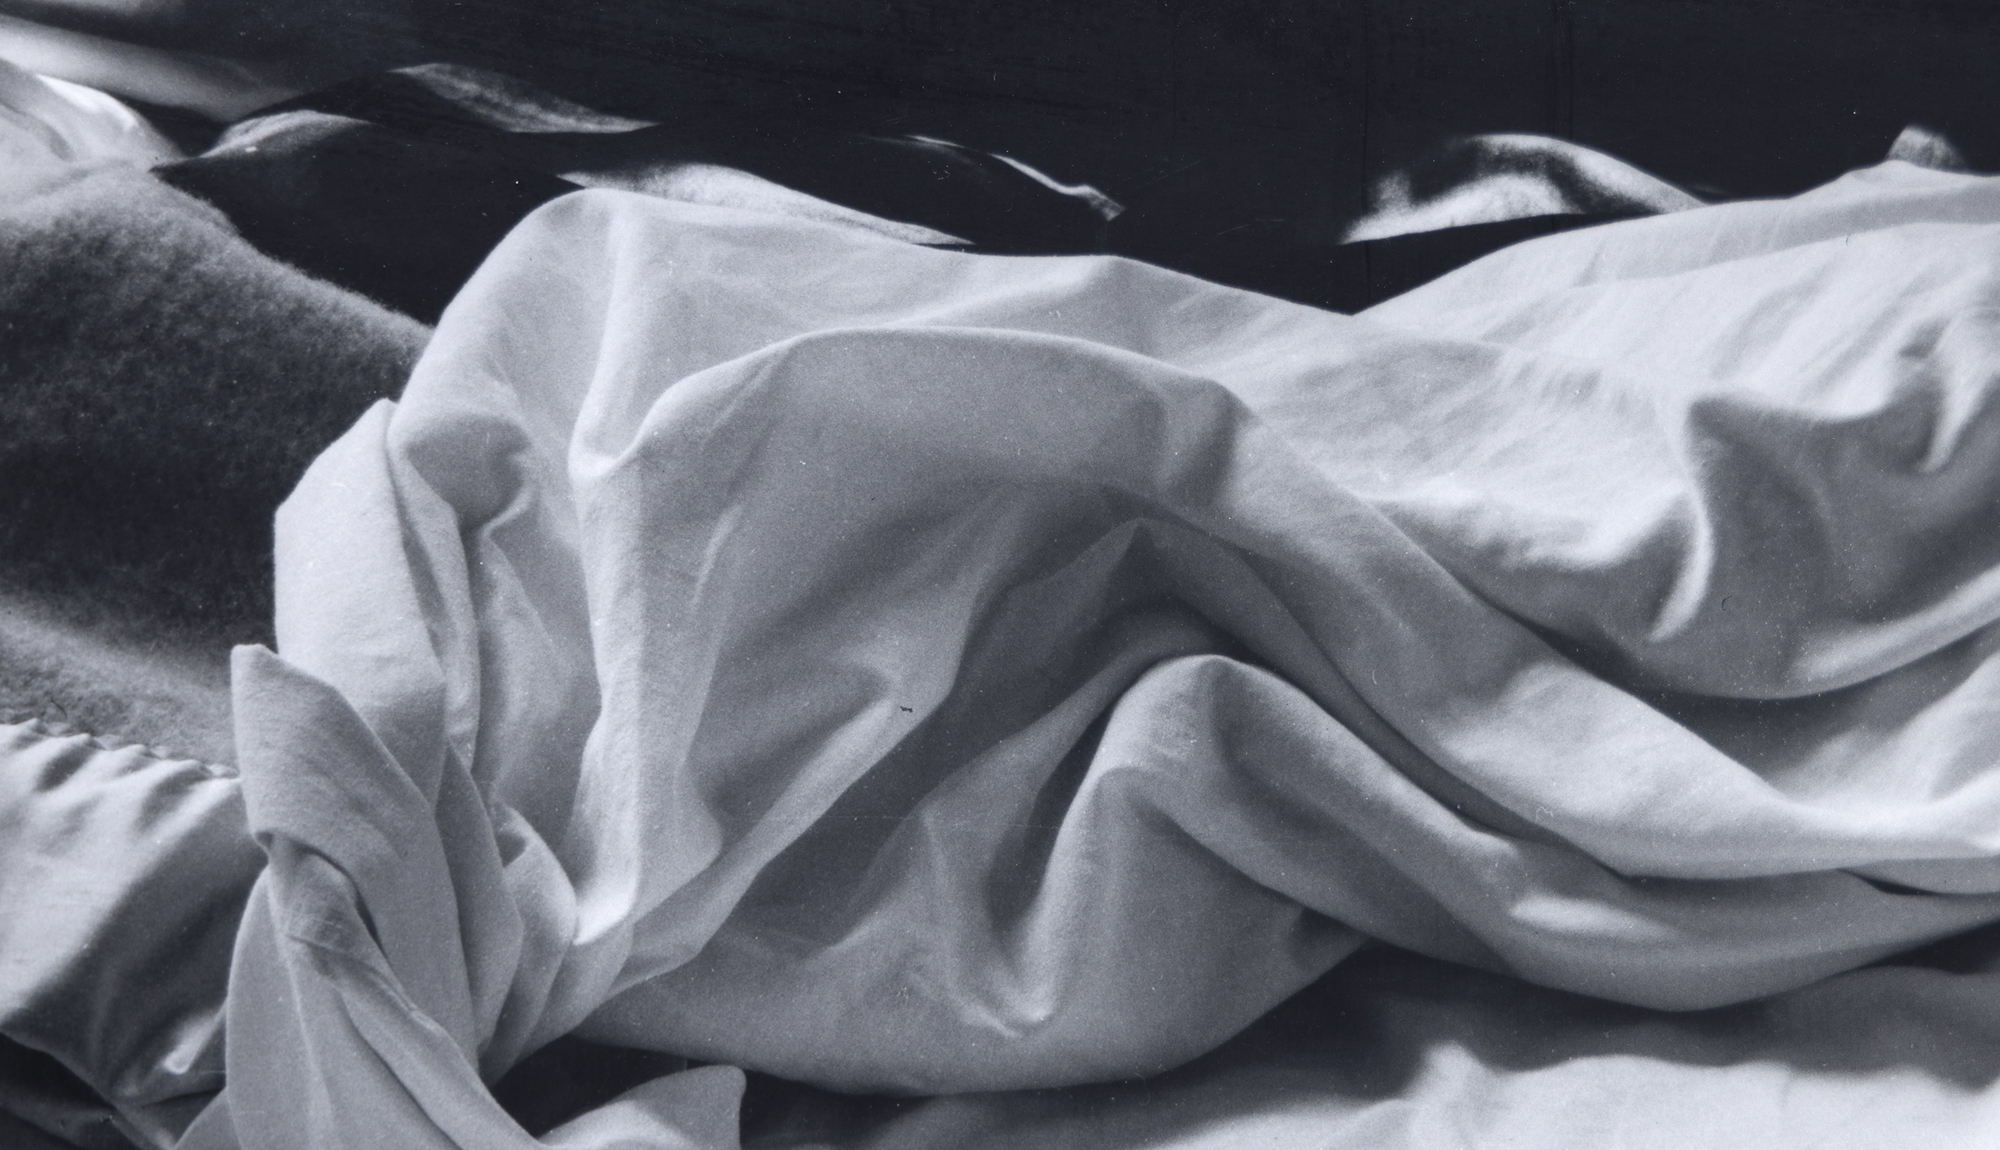 IMOGEN CUNNINGHAM - The Unmade Bed - silver gelatin print - 10 1/4 x 13 1/2 in.